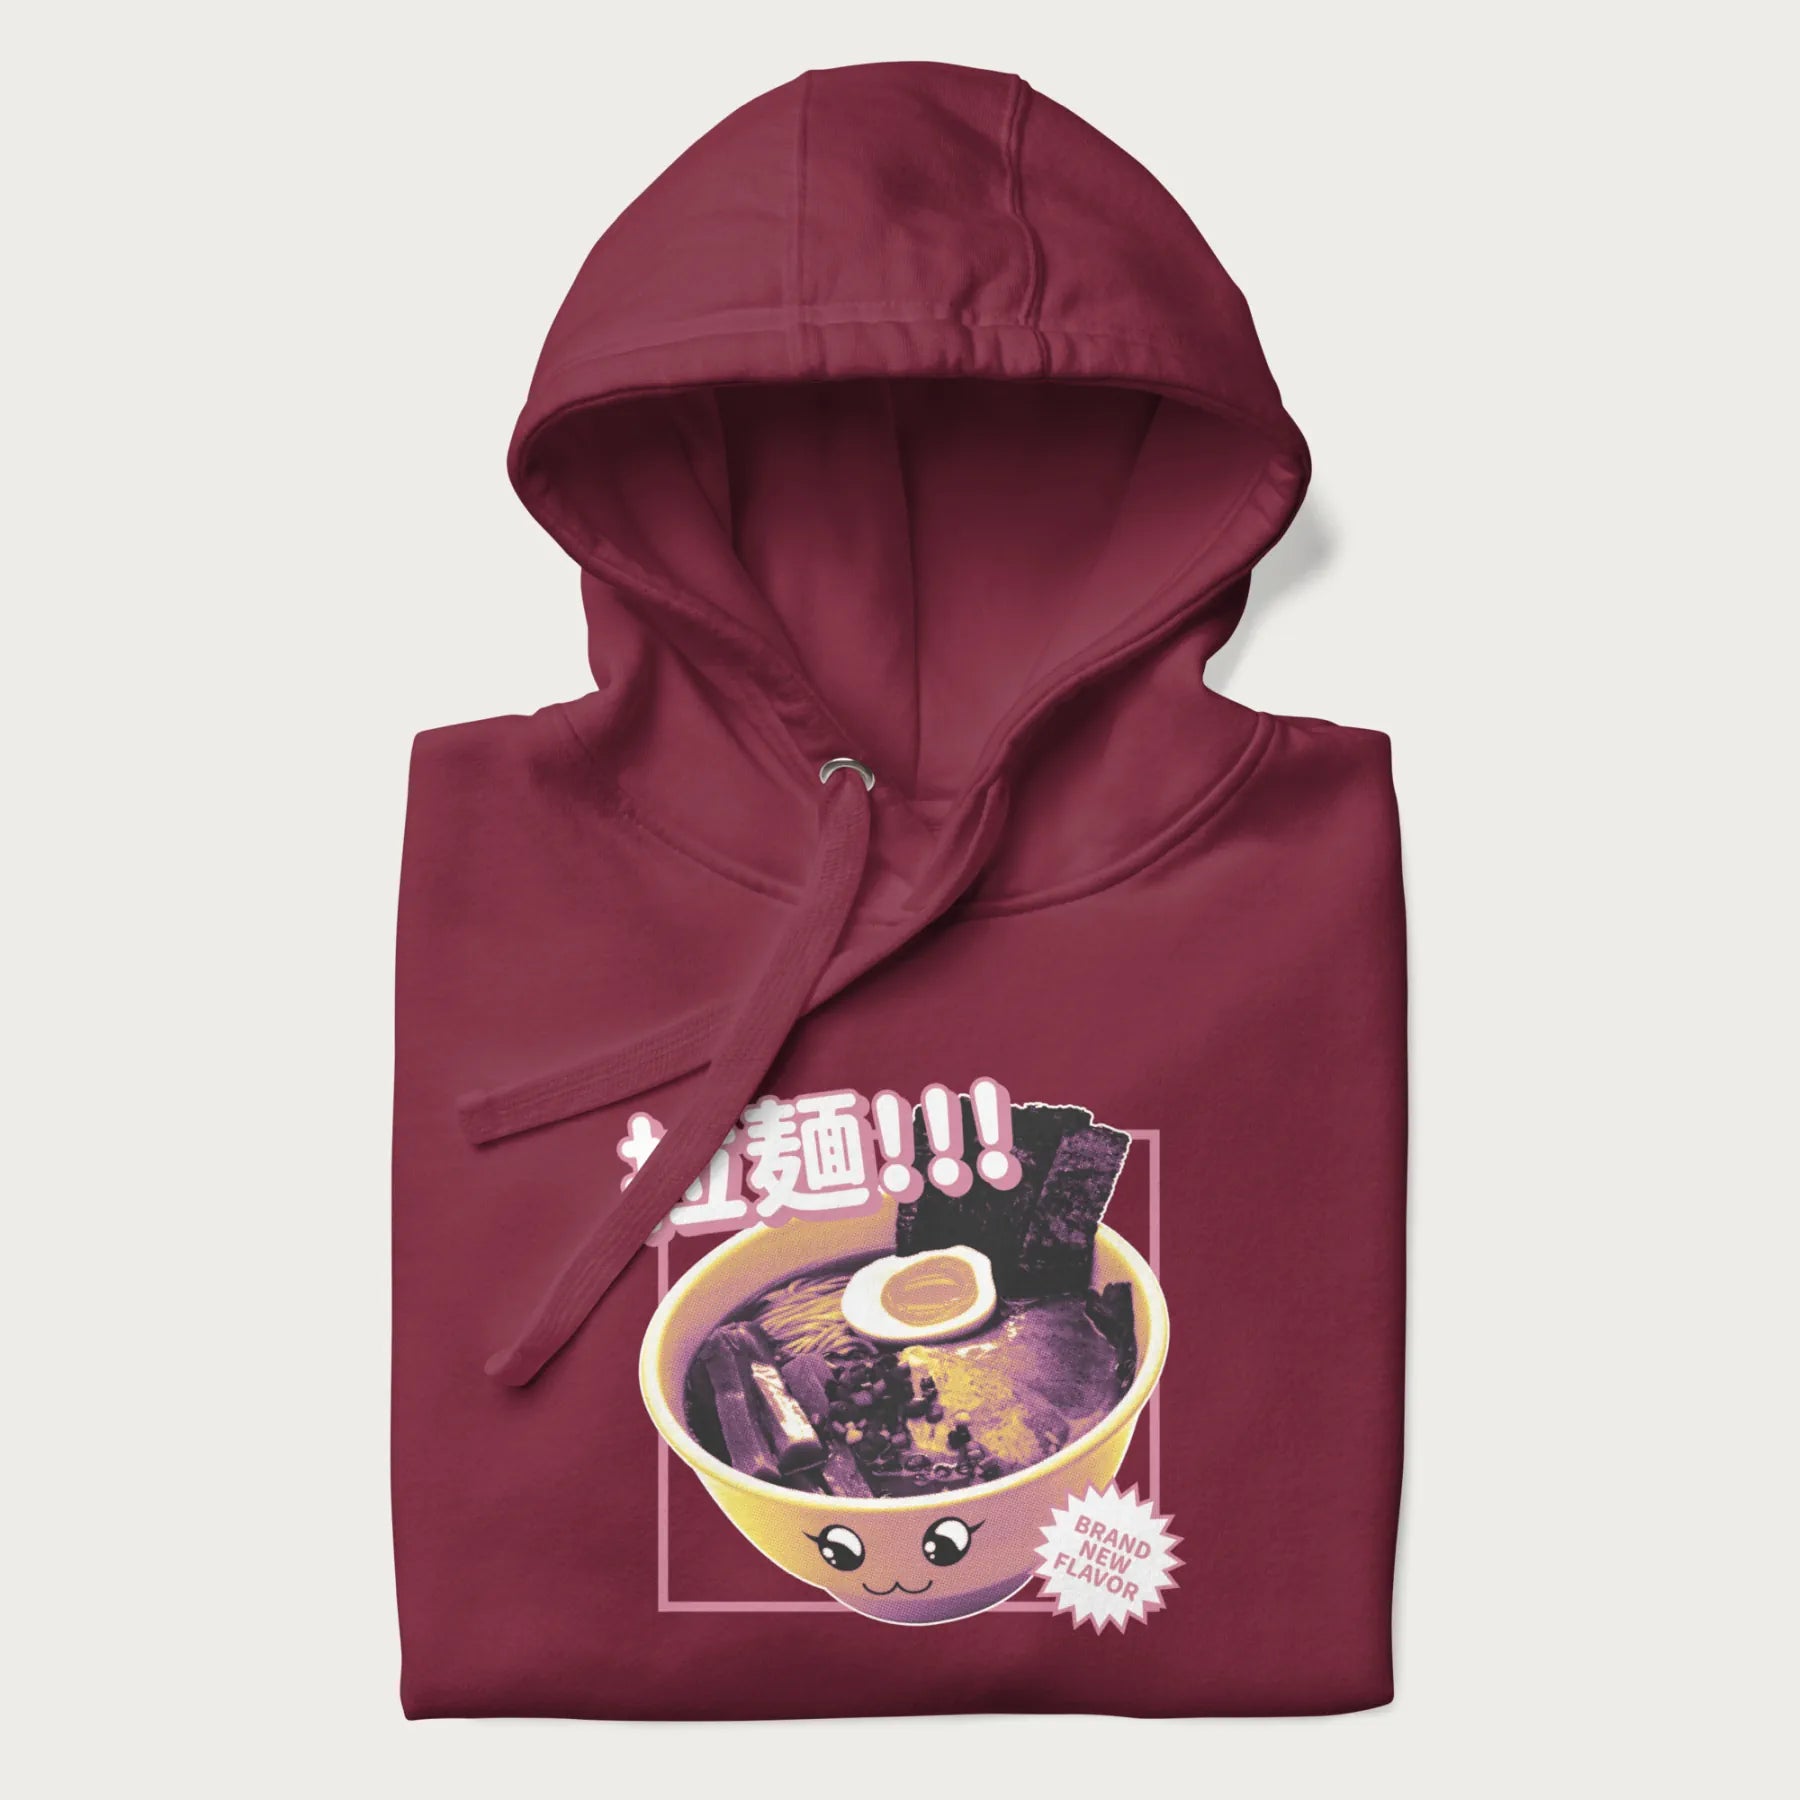 Folded maroon hoodie with Japanese text '拉麵!!!' (Ramen!!!) in vibrant pink and realistic ramen bowl graphic.